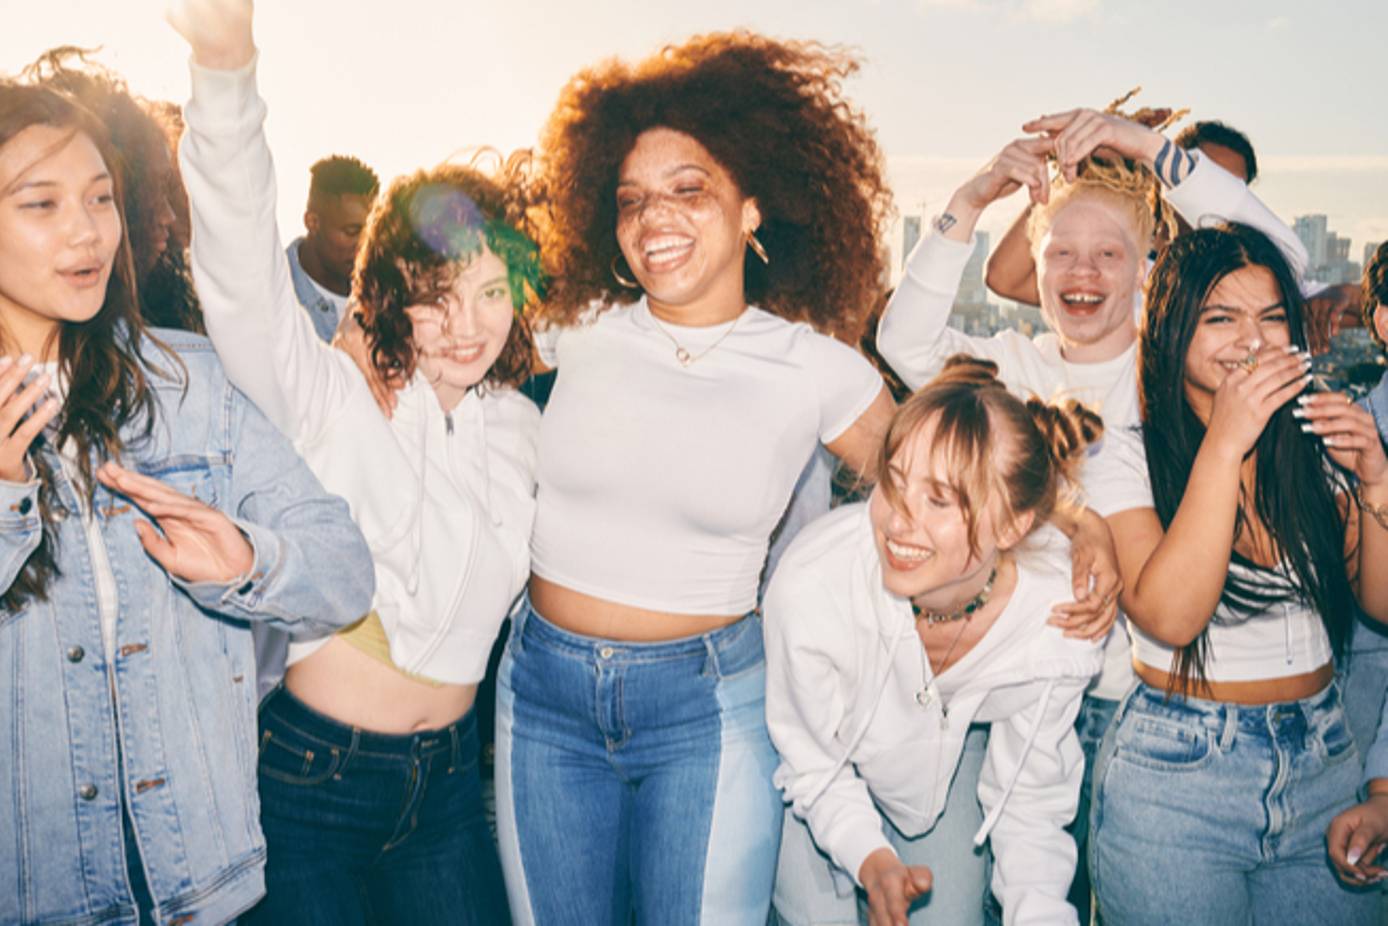 Hollister relaunches Gilly Hicks brand with a startup-style spin - Modern  Retail